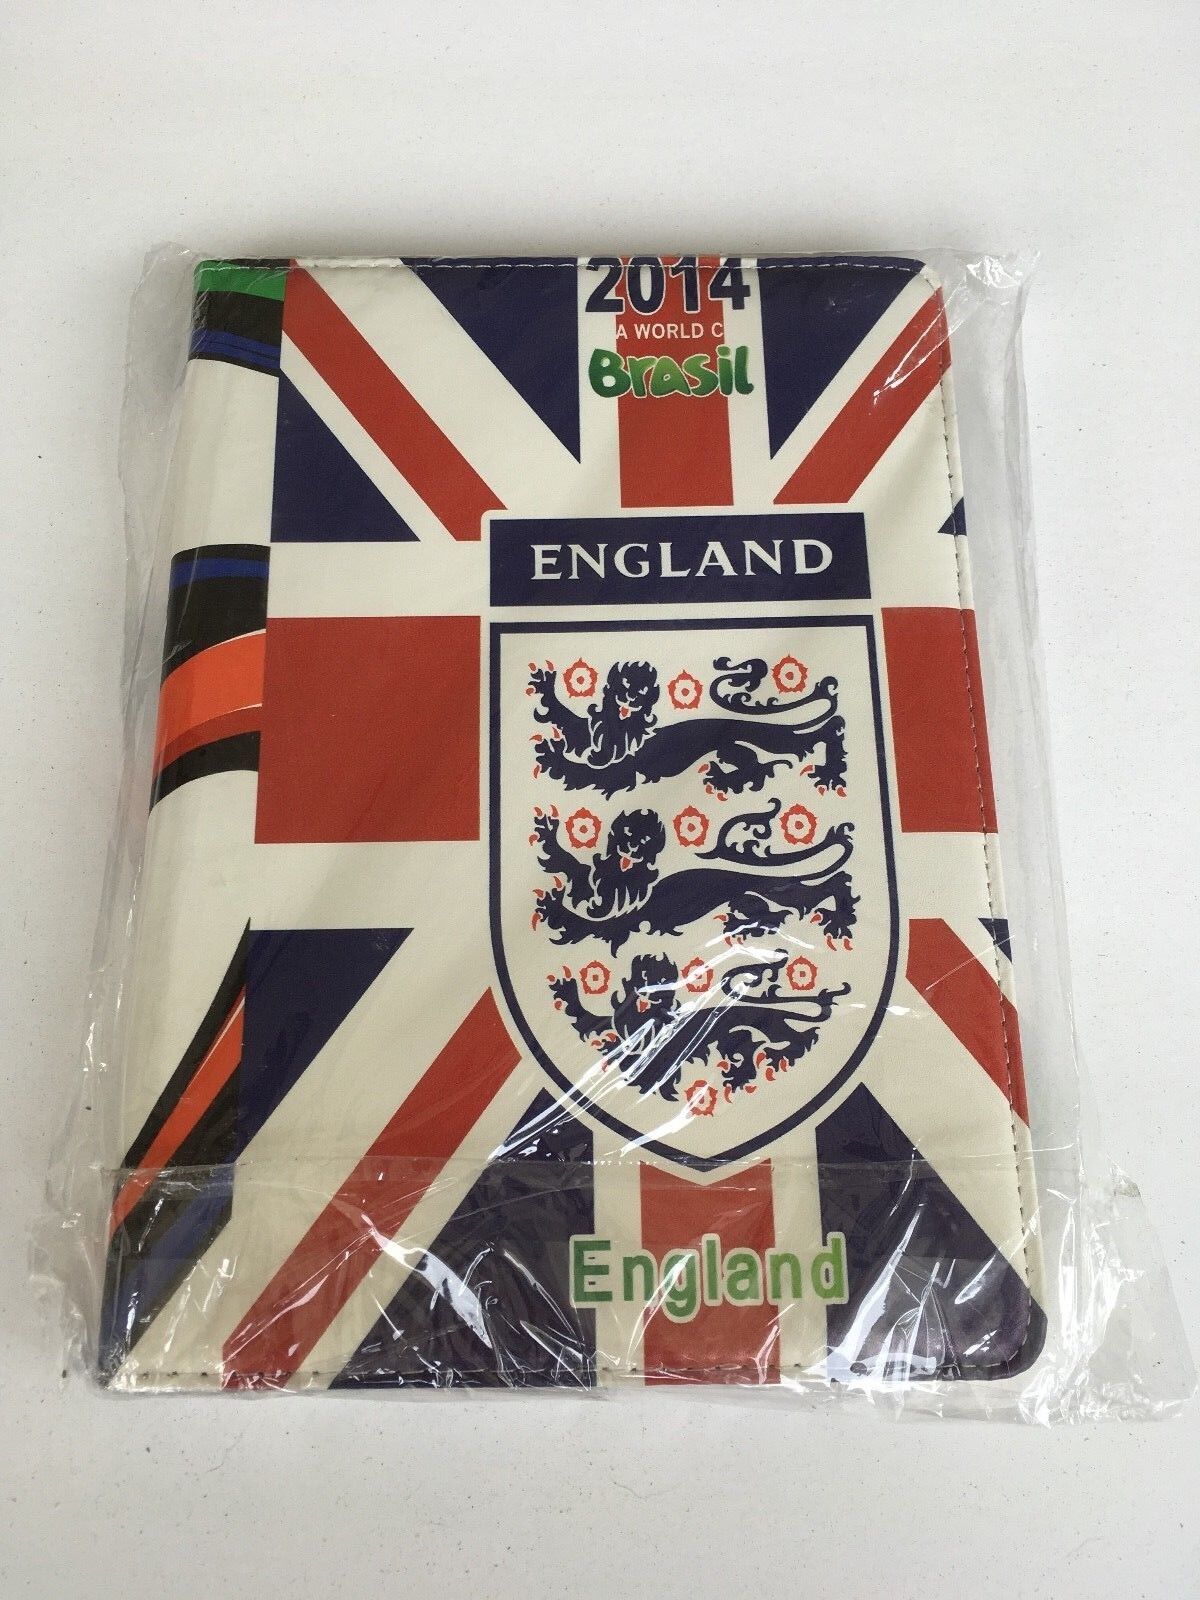 World Cup 2014 iPad Air Case England and Brazil Soccer l Fits iPad Air